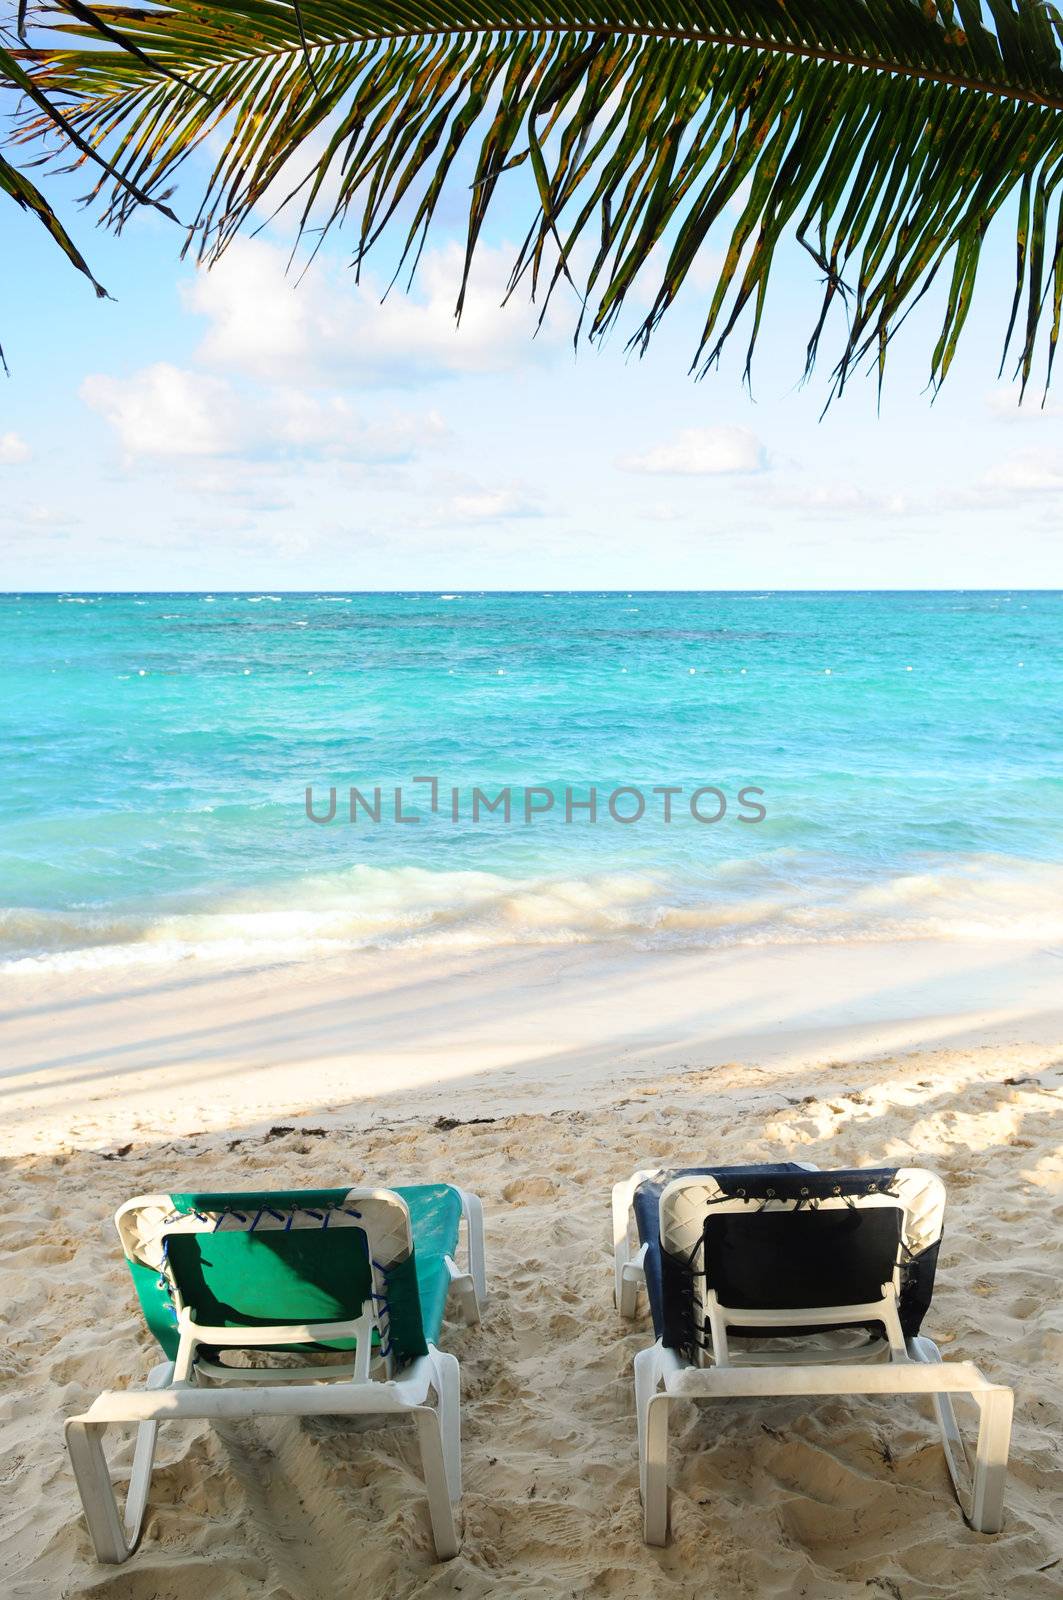 Beach chairs on ocean shore by elenathewise